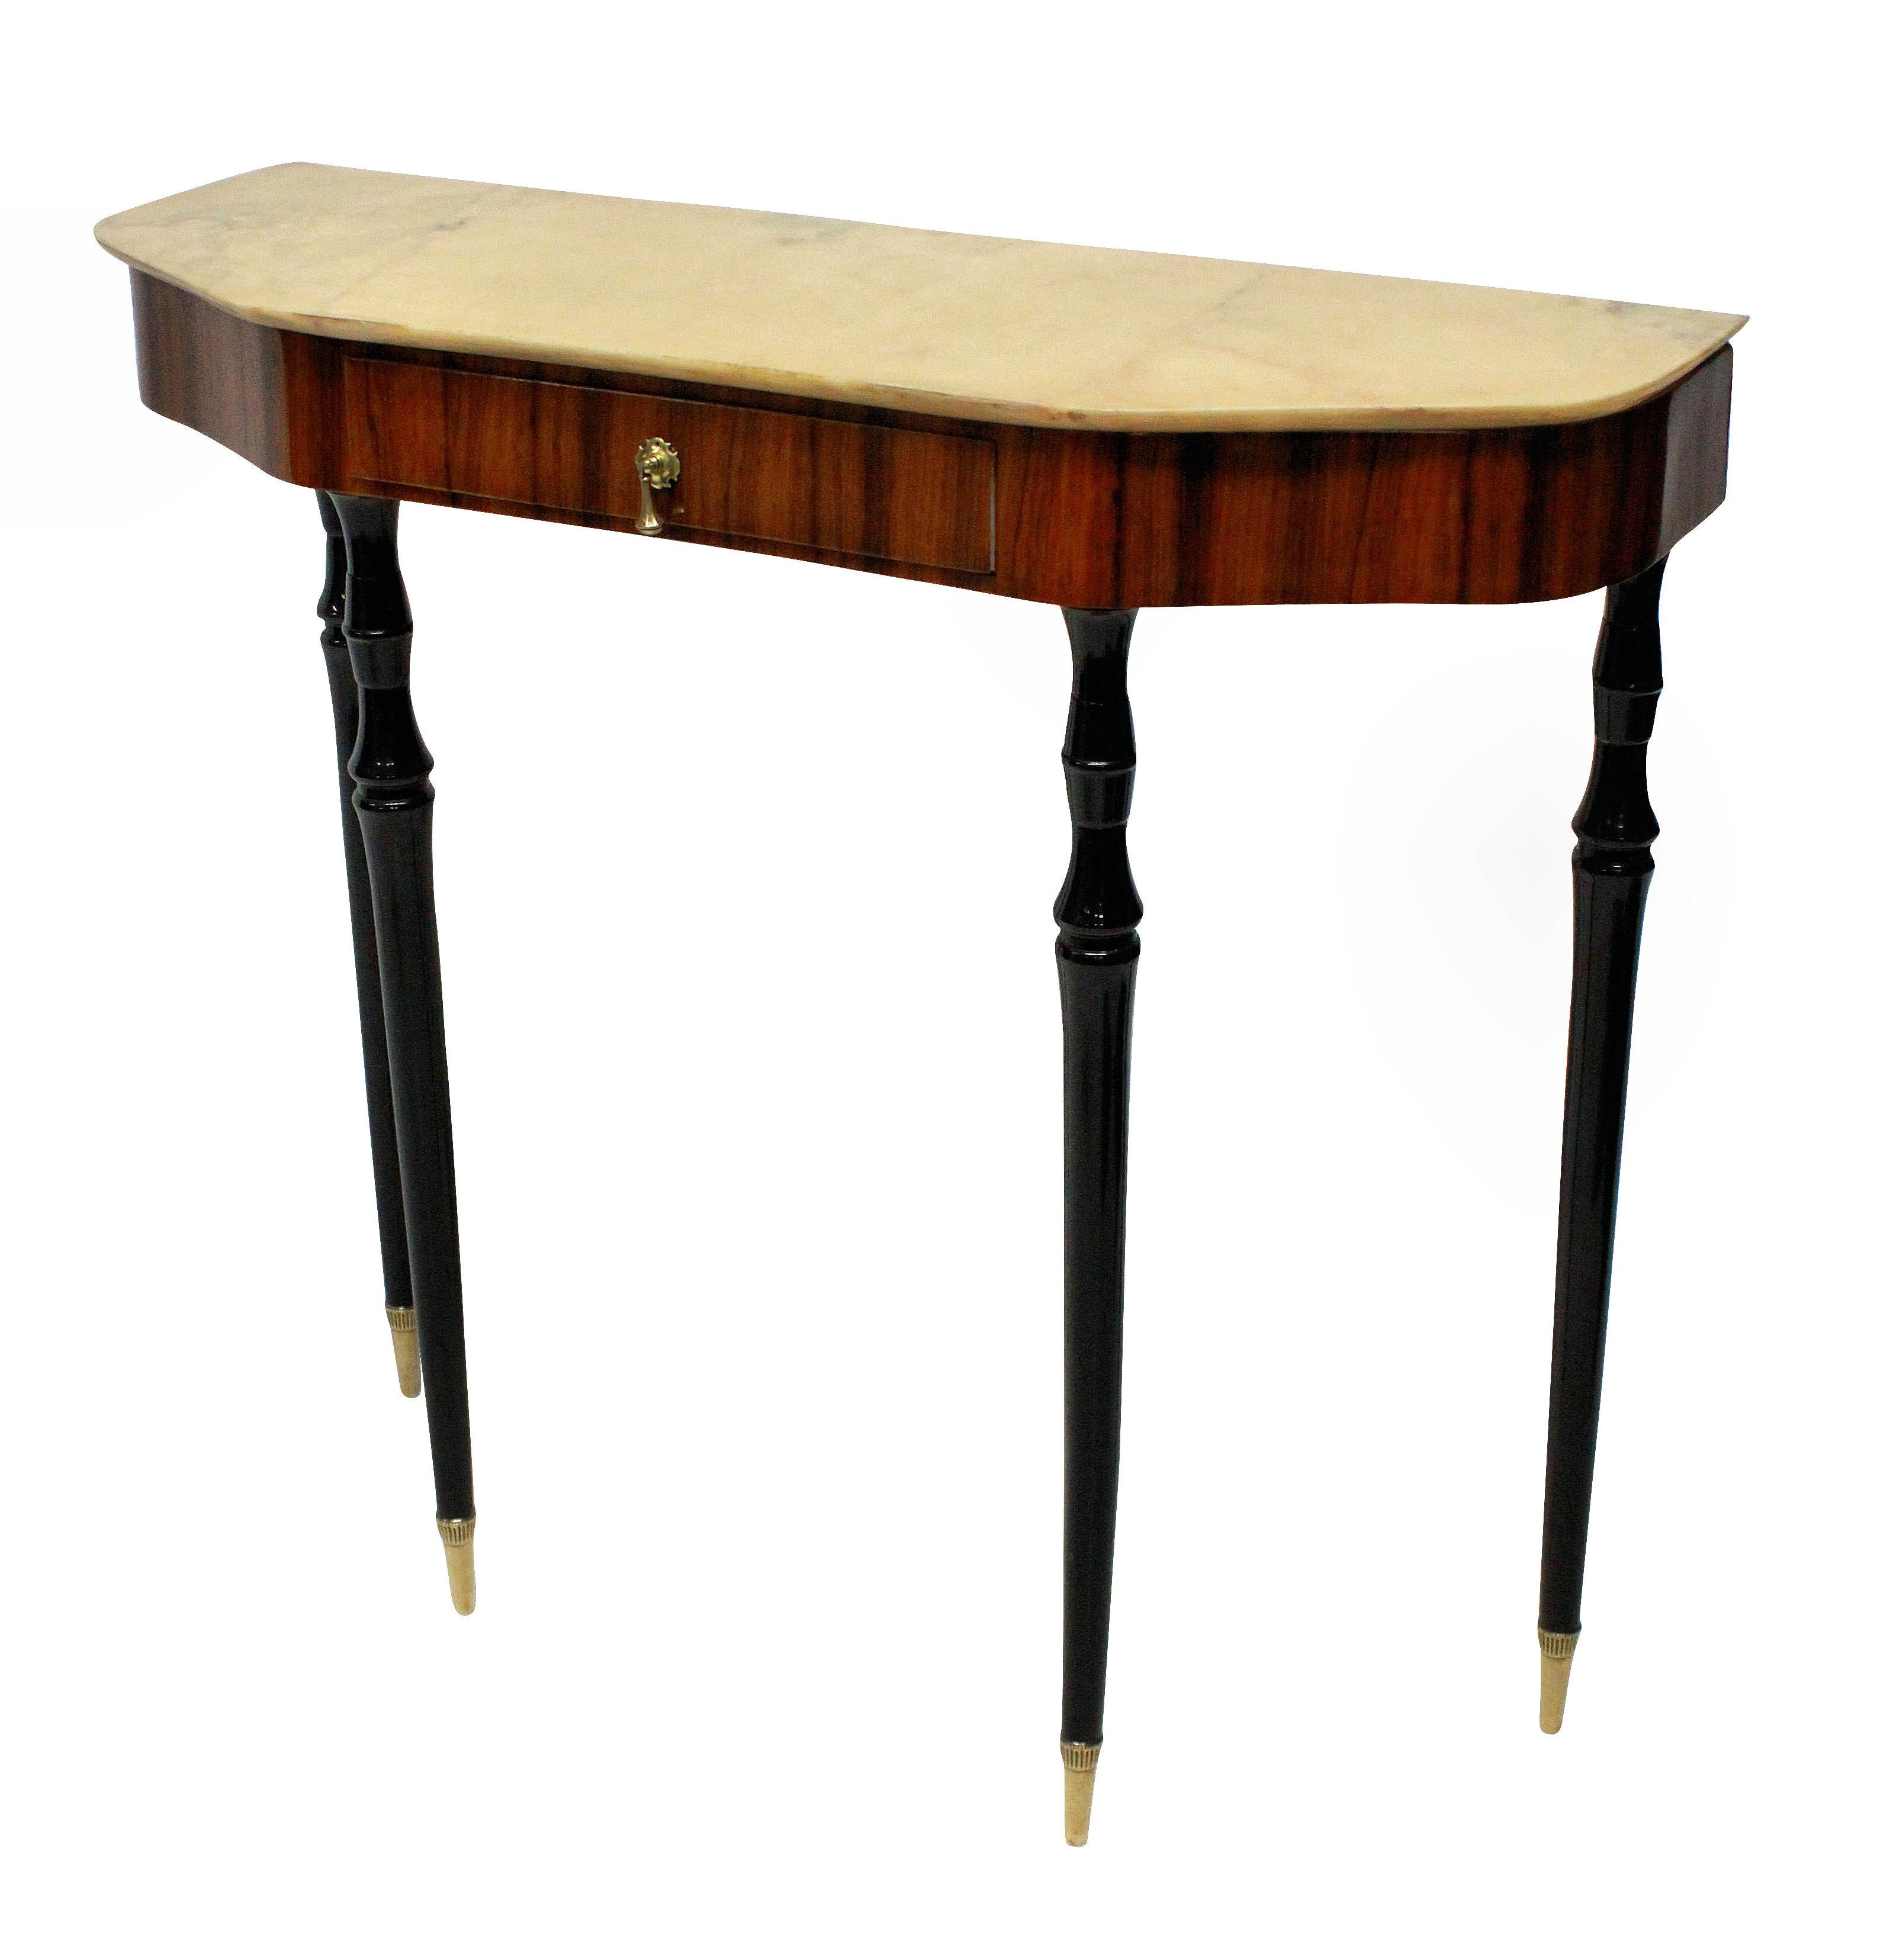 An elegant Italian midcentury console table, with ebonized tapering legs, a rosewood veneered frieze with drawer, brass hardware and a sienna marble top.